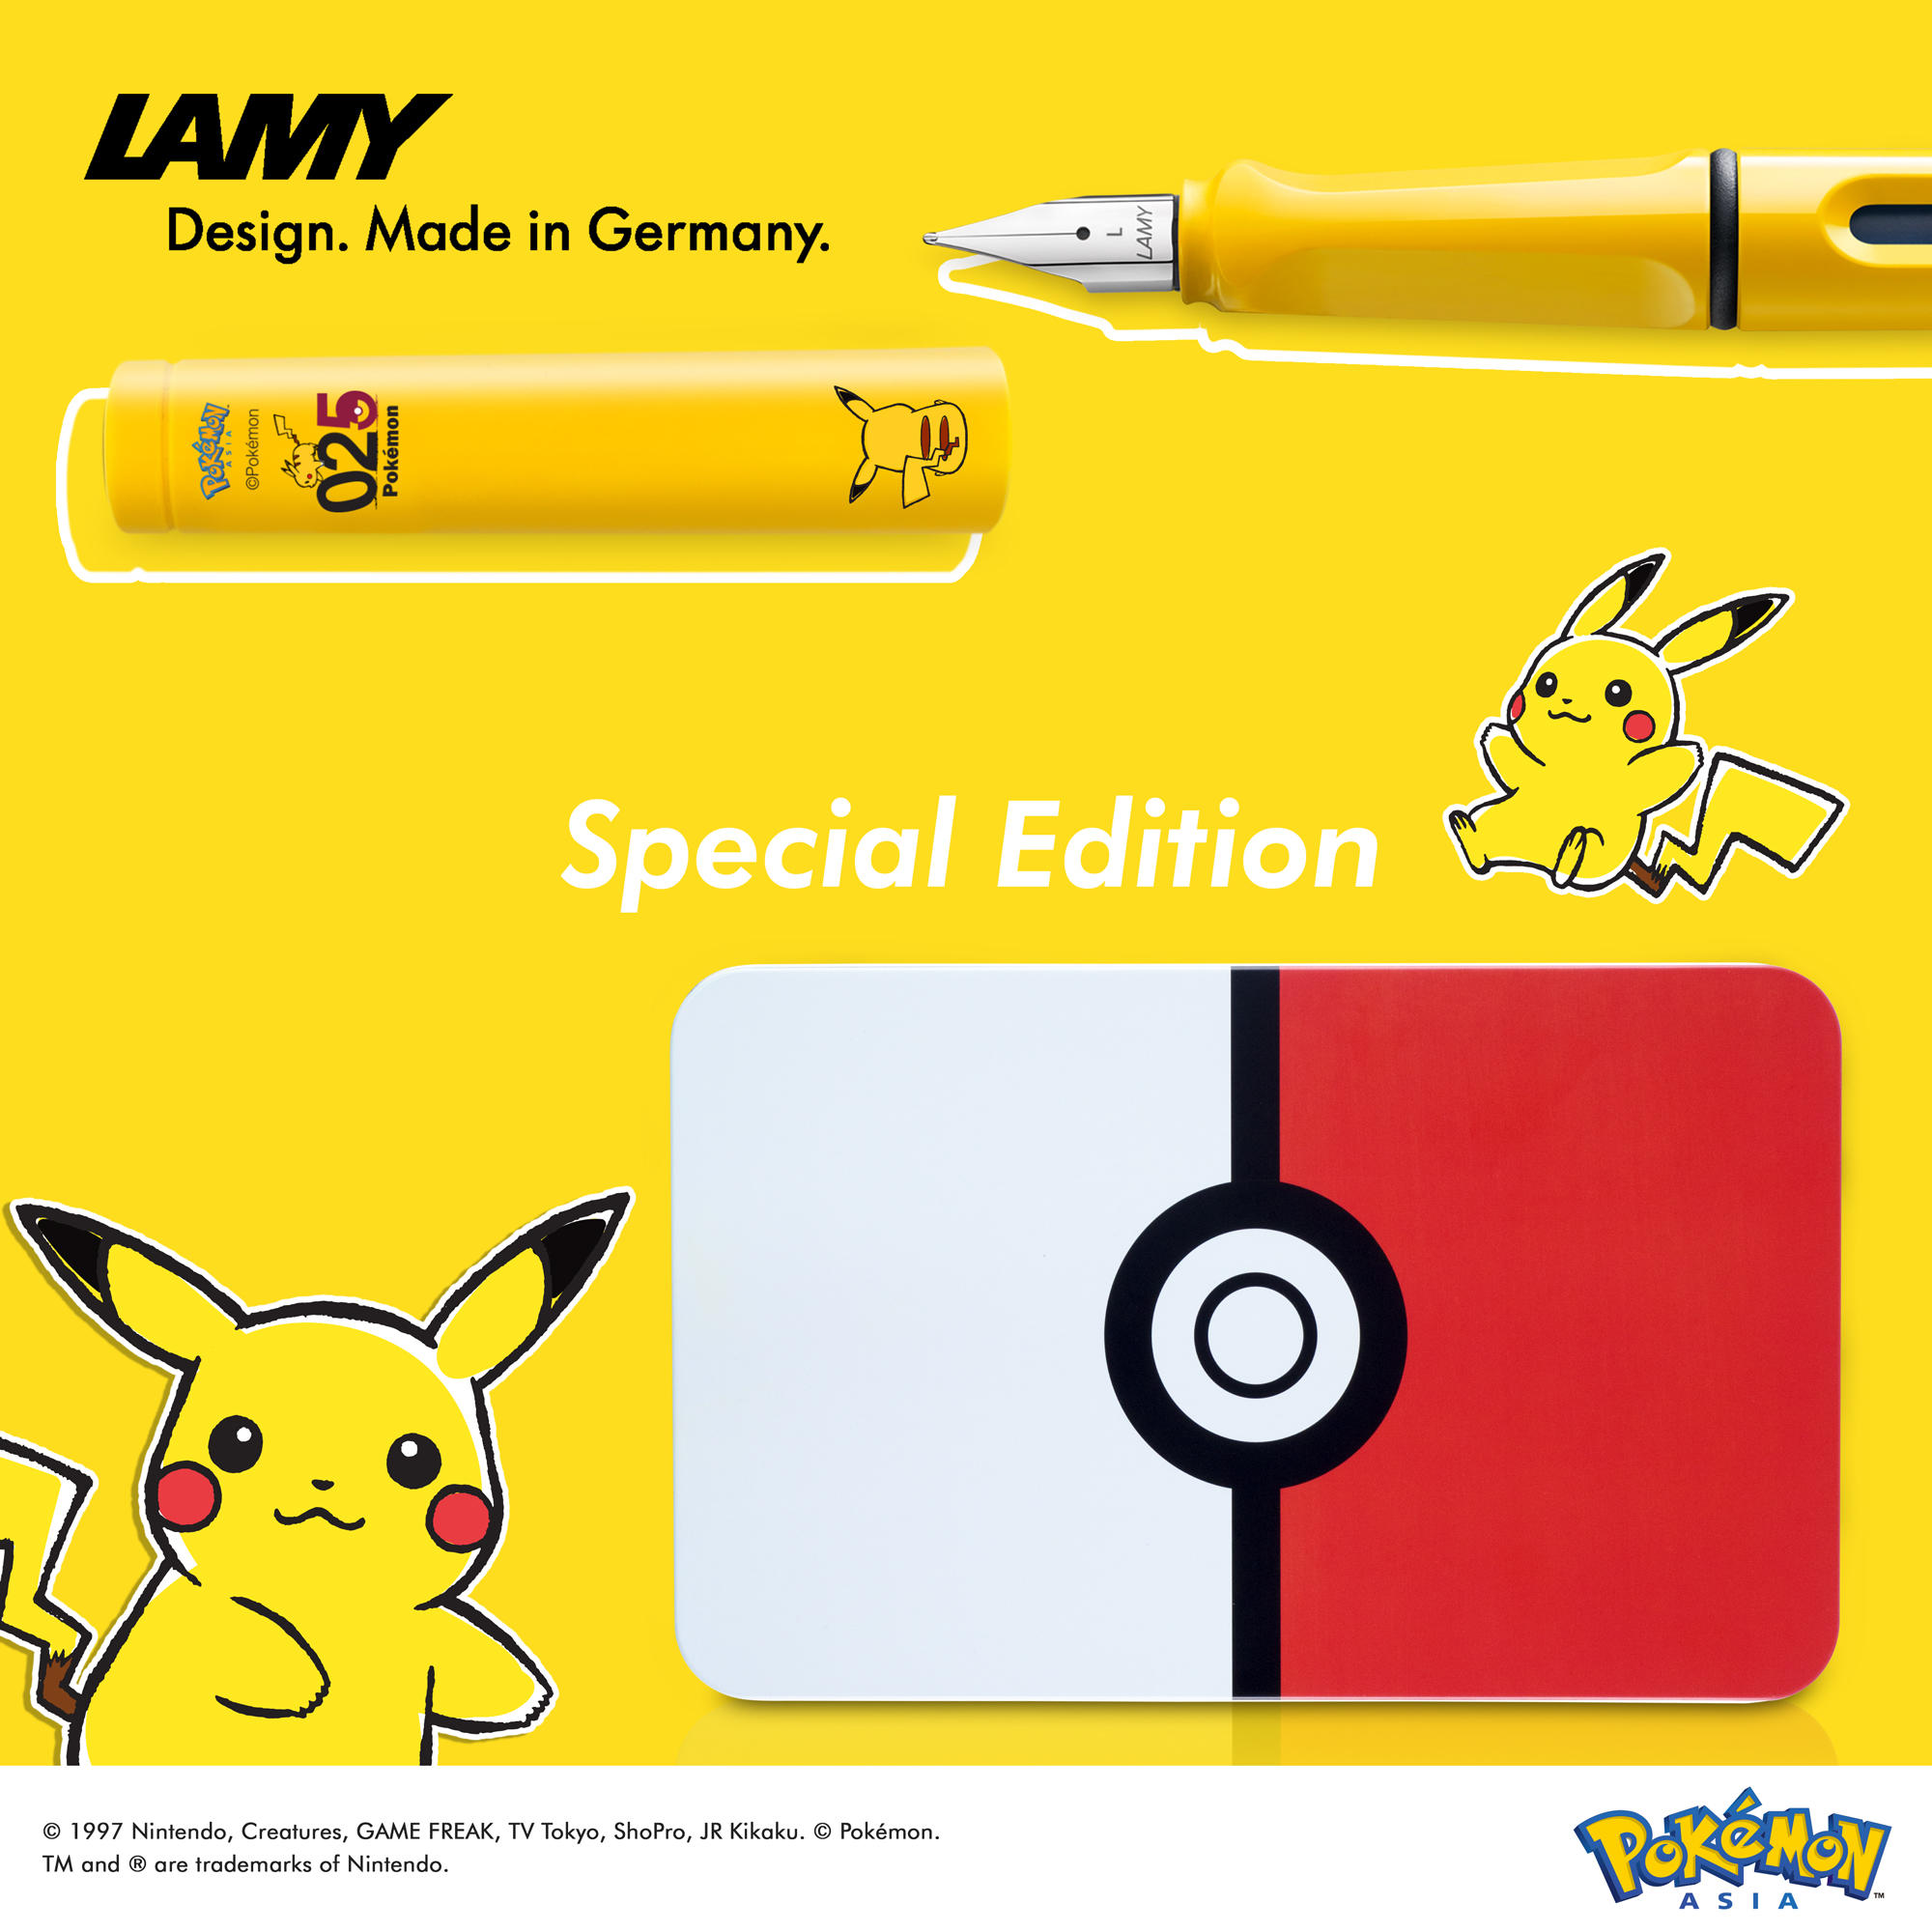 LAMY and Pokémon spark up stationery scene with unveiling of special edition set | Goods | The official Pokémon Website in